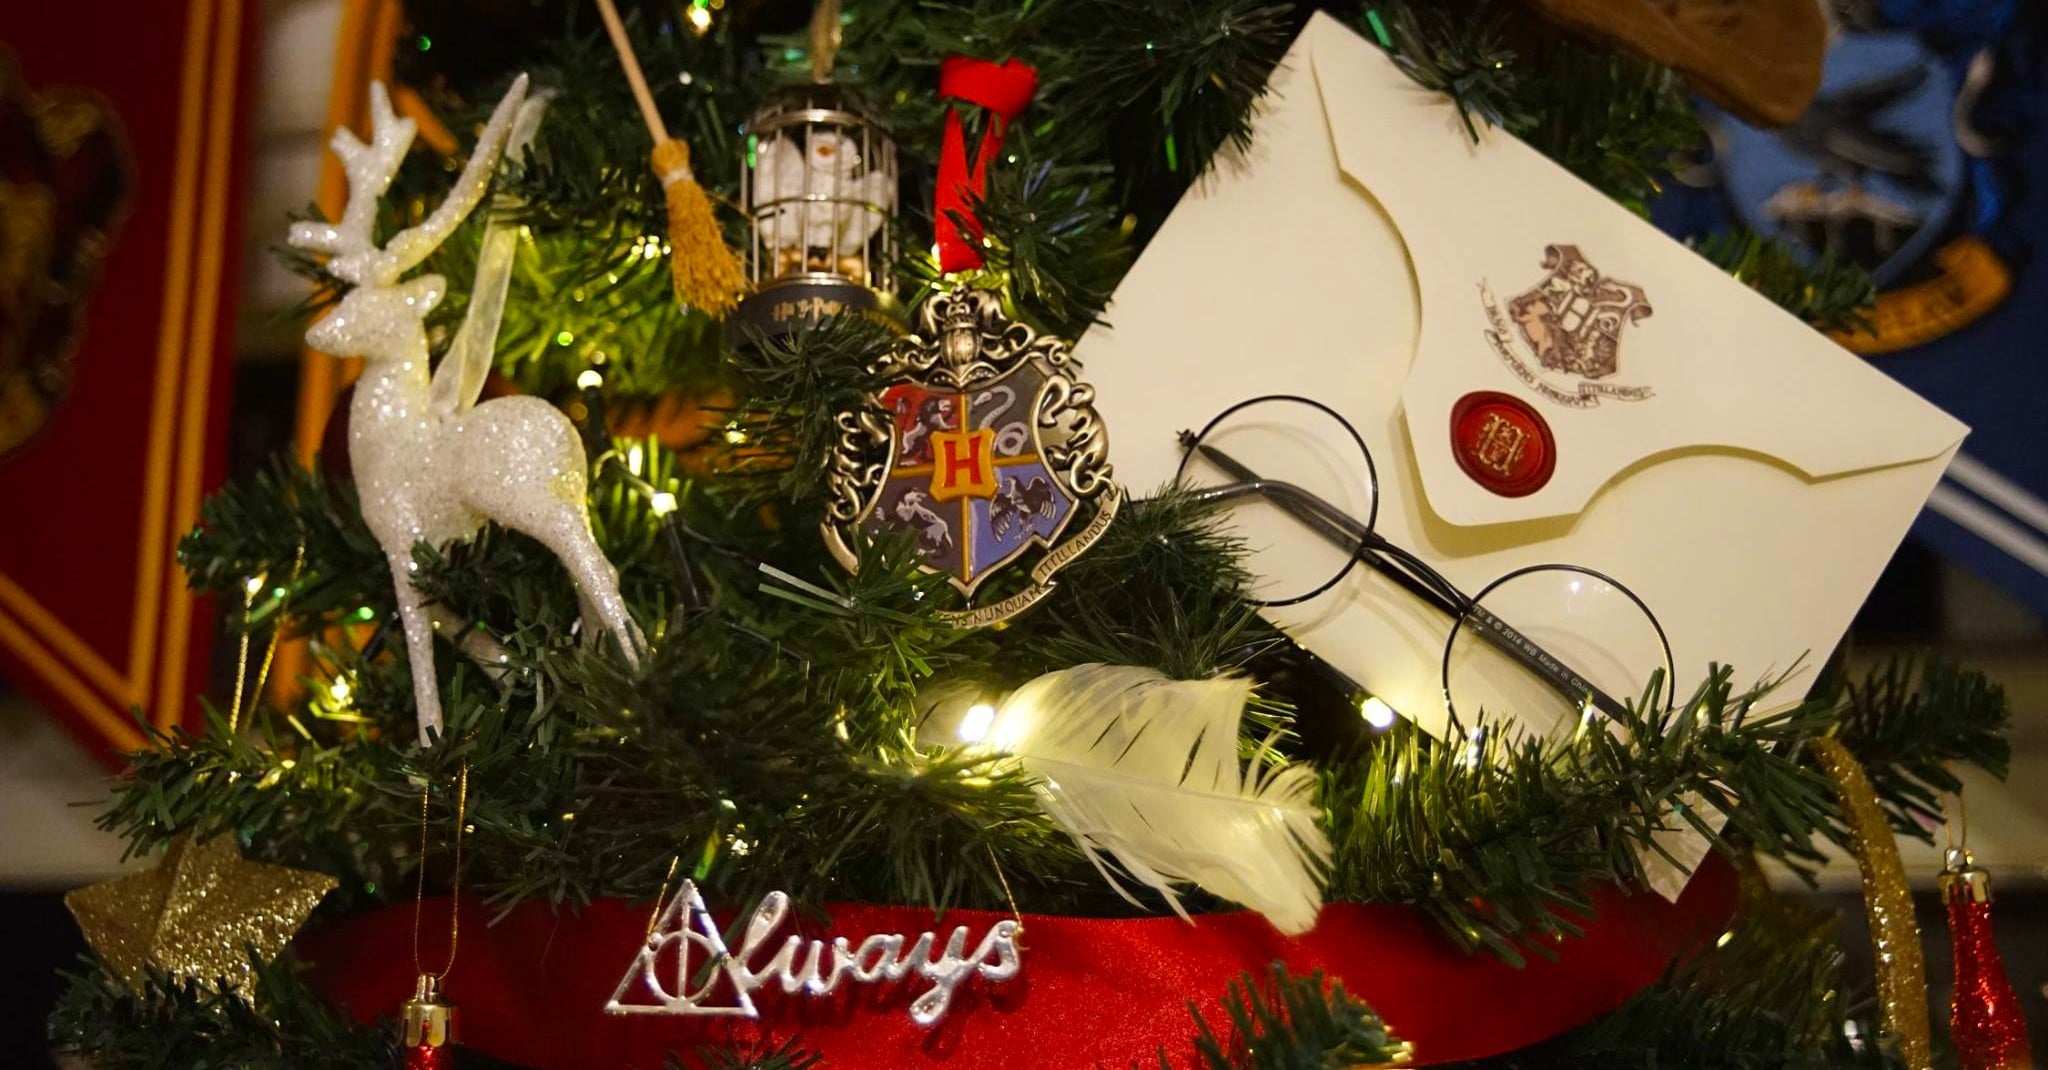 A Closer Look at the Viral Harry Potter Christmas Tree – Popcorner Reviews